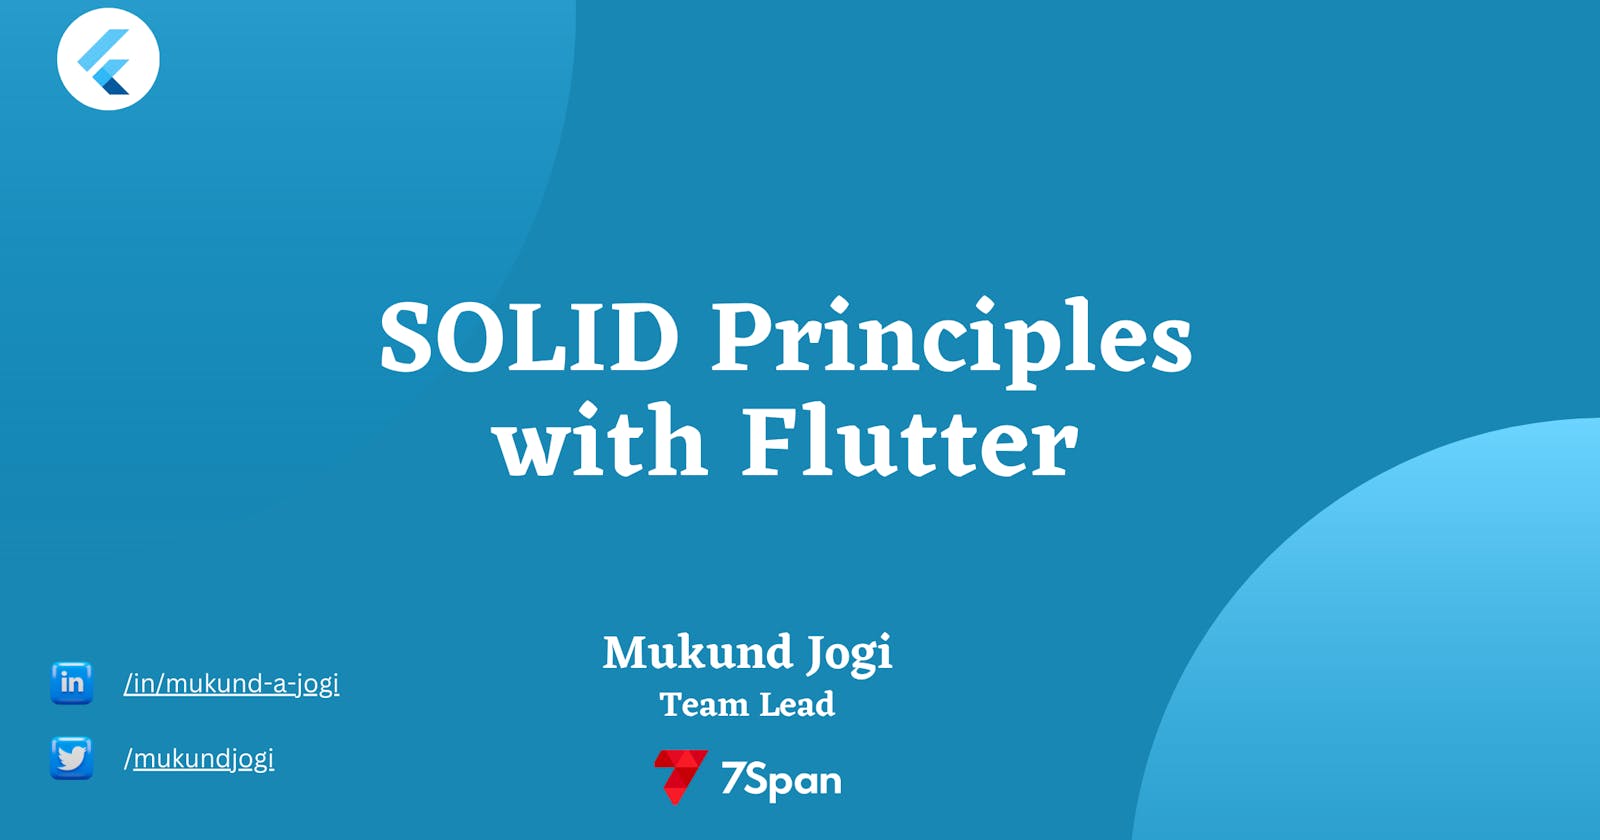 SOLID Principles with Flutter